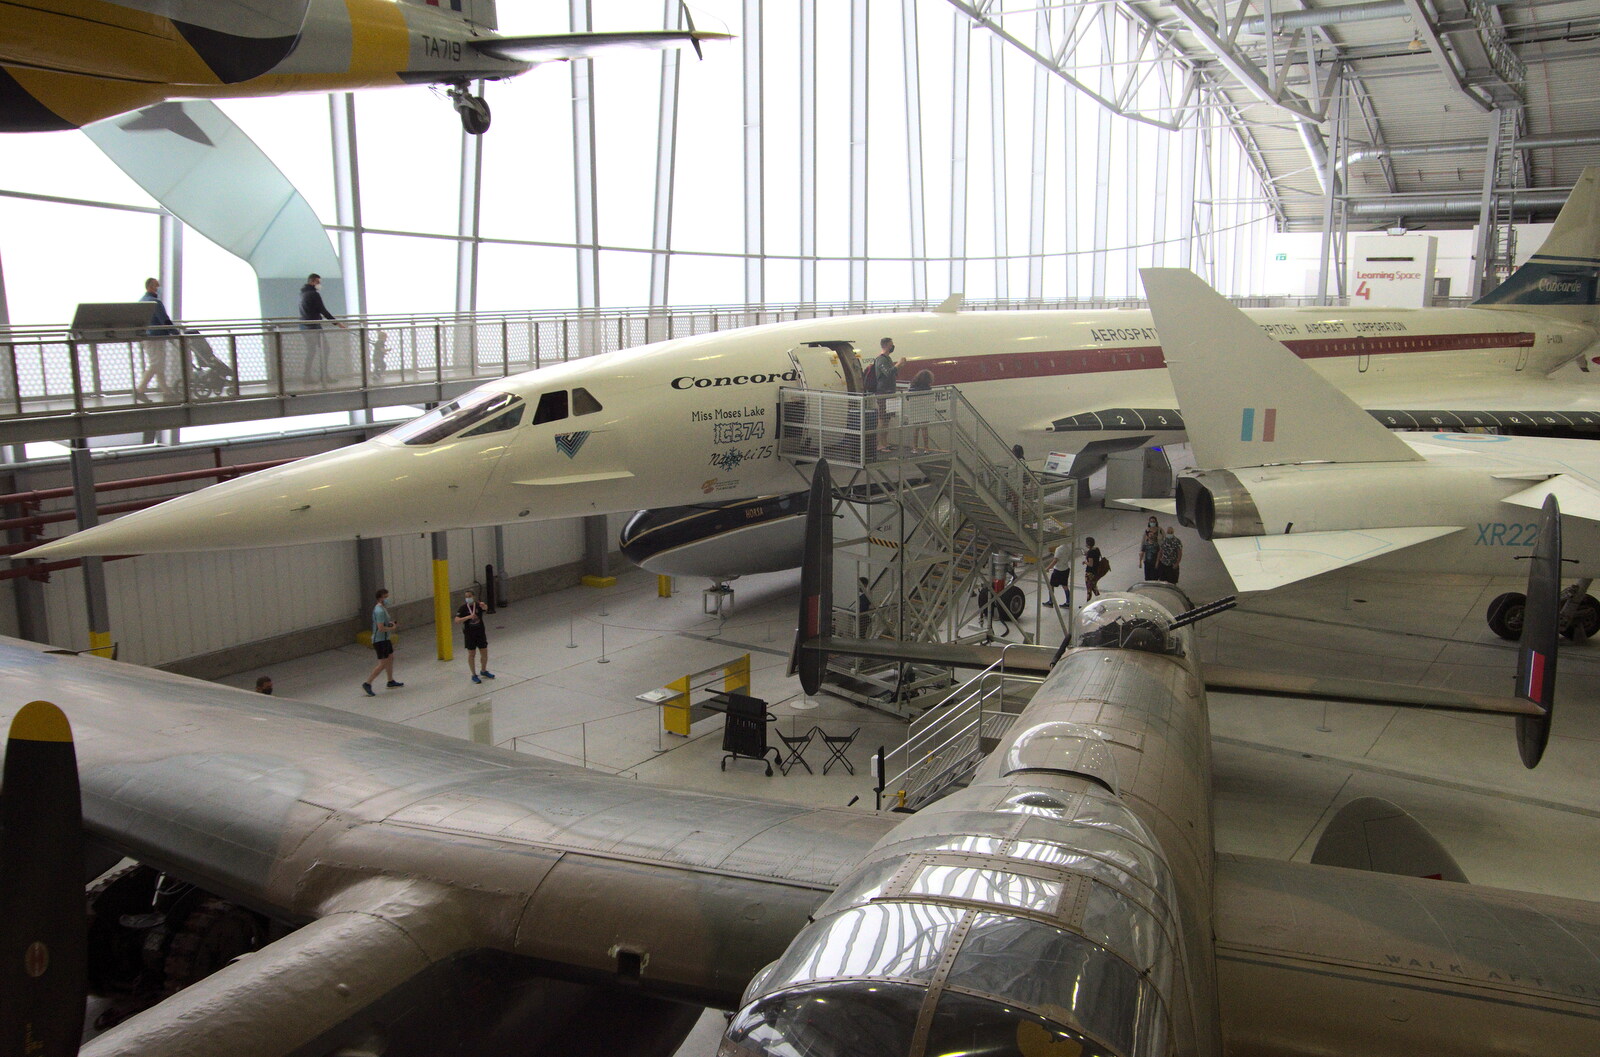 Concorde and a Lancaster from The Duxford Dash, IWM Duxford, Cambridge - 13th September 2020